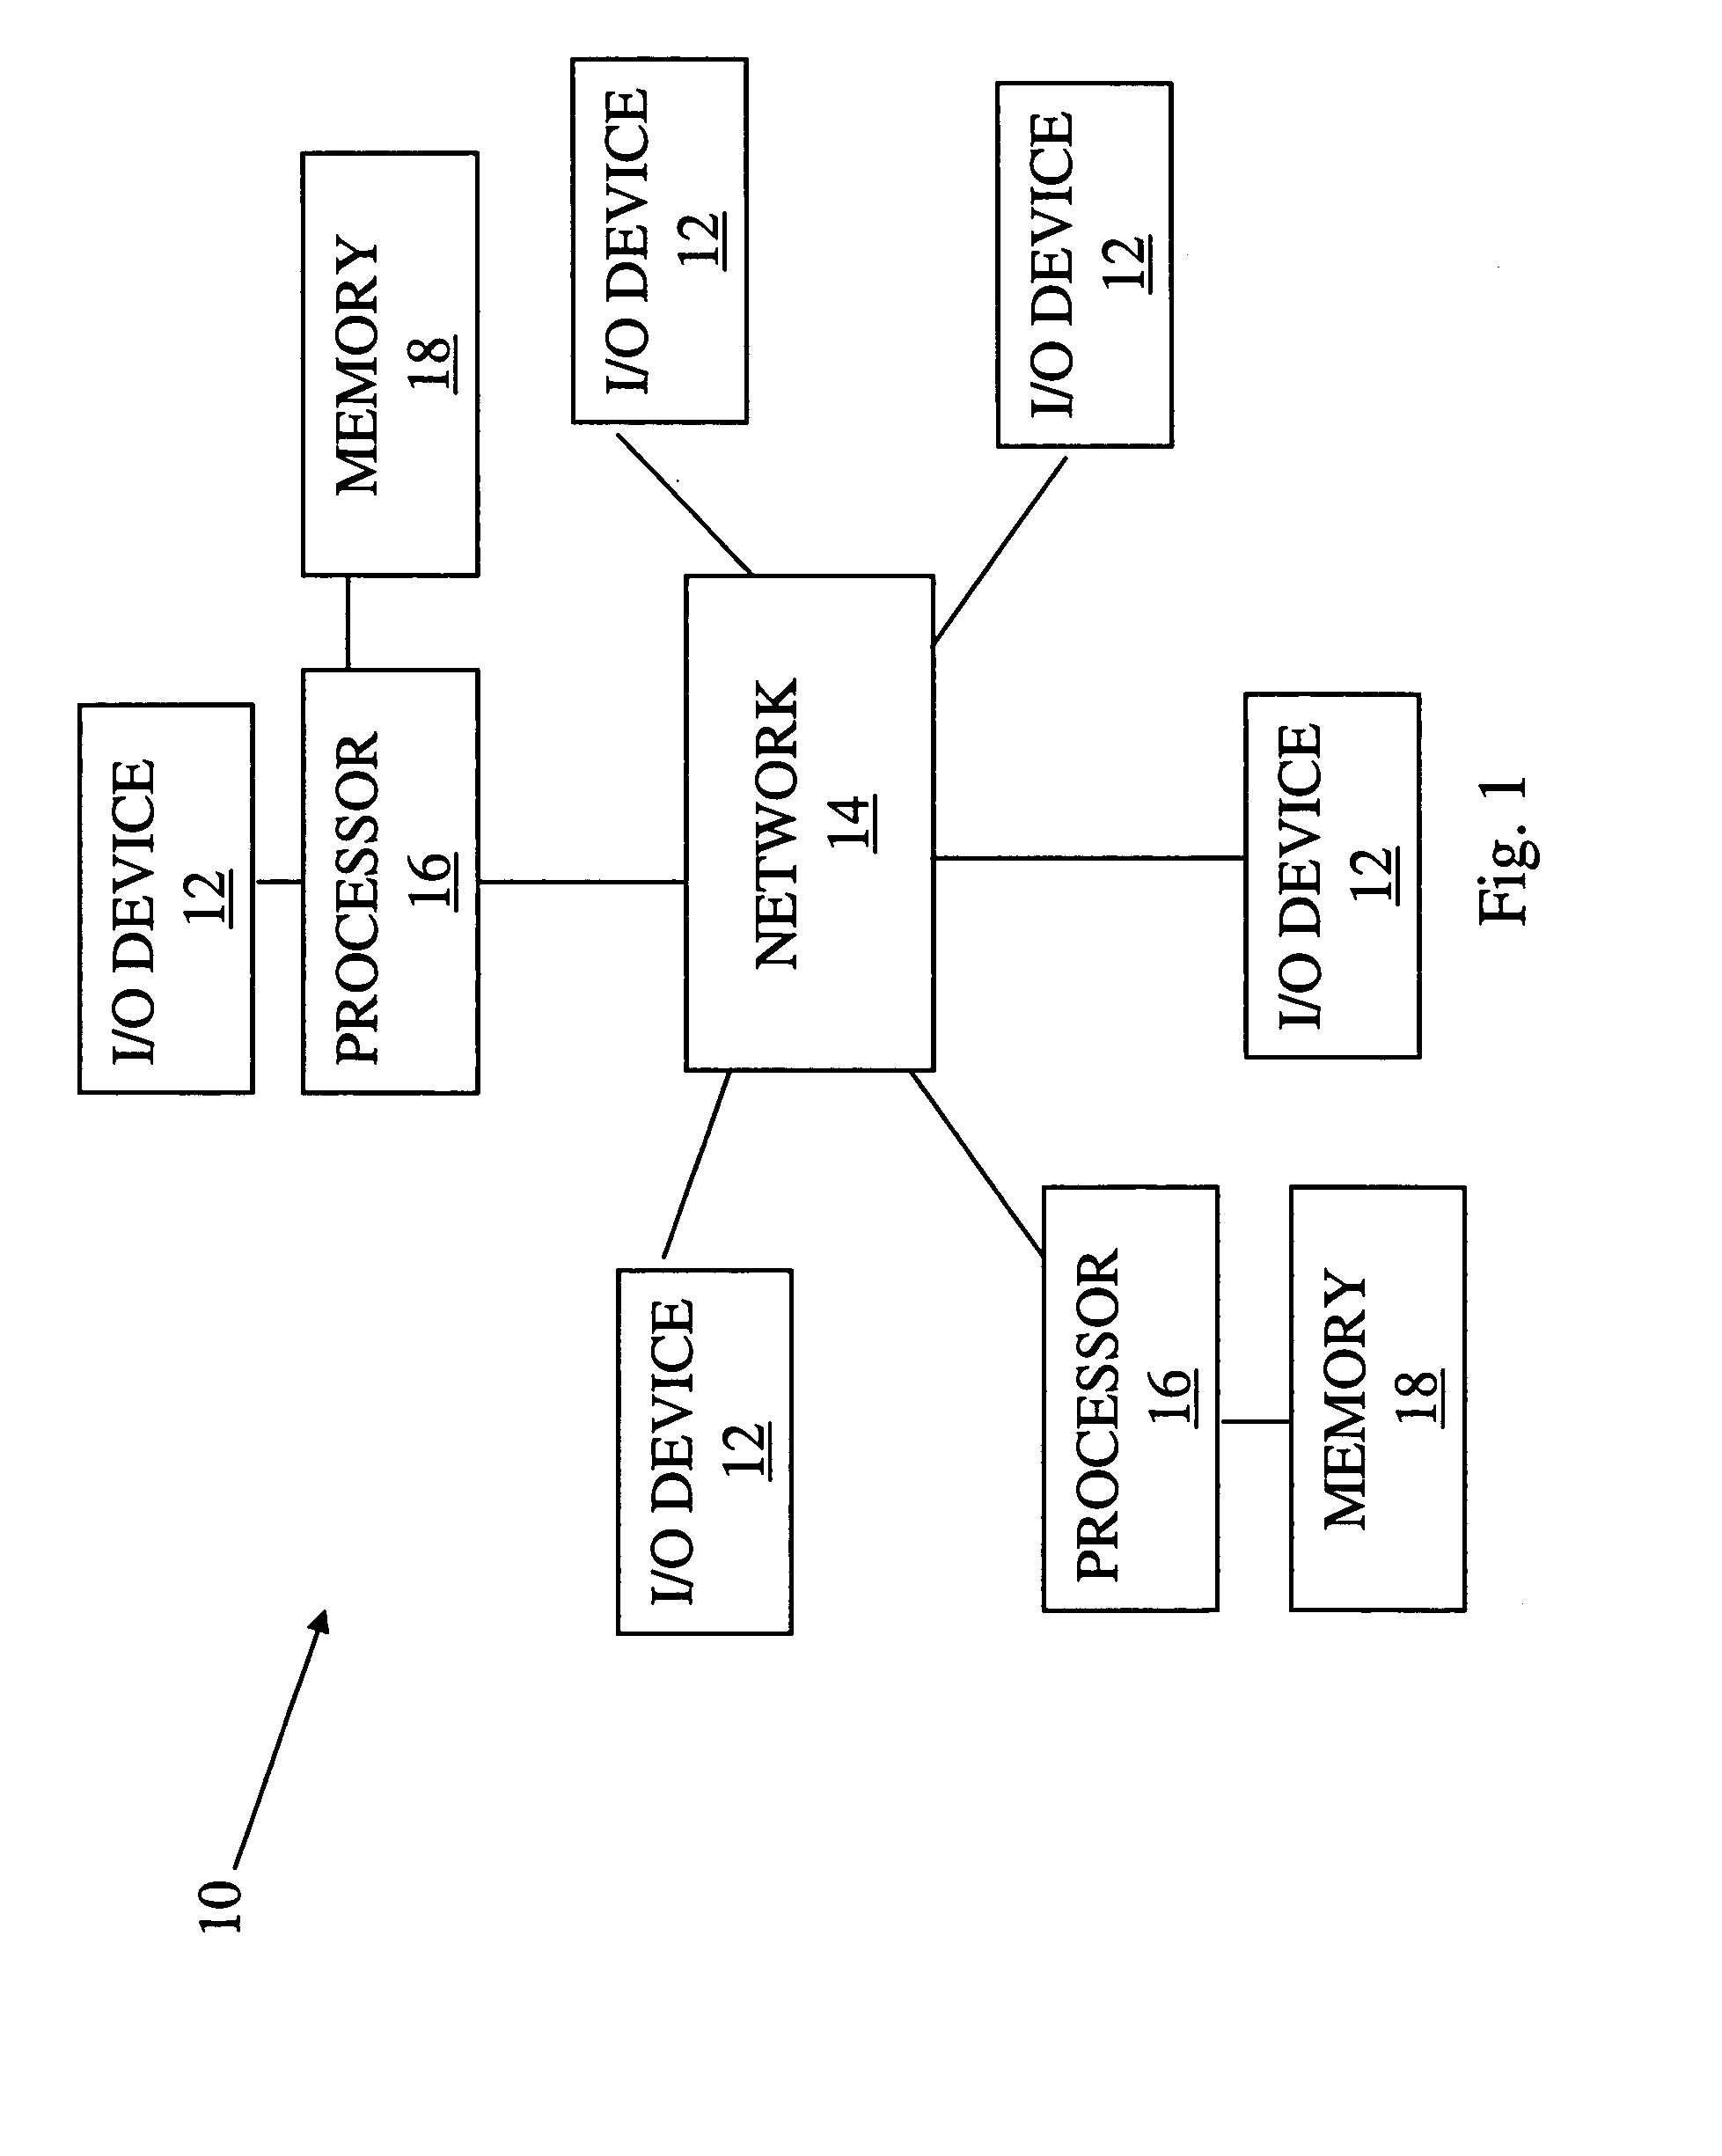 Method, apparatus, and system for object recognition, object segmentation and knowledge acquisition